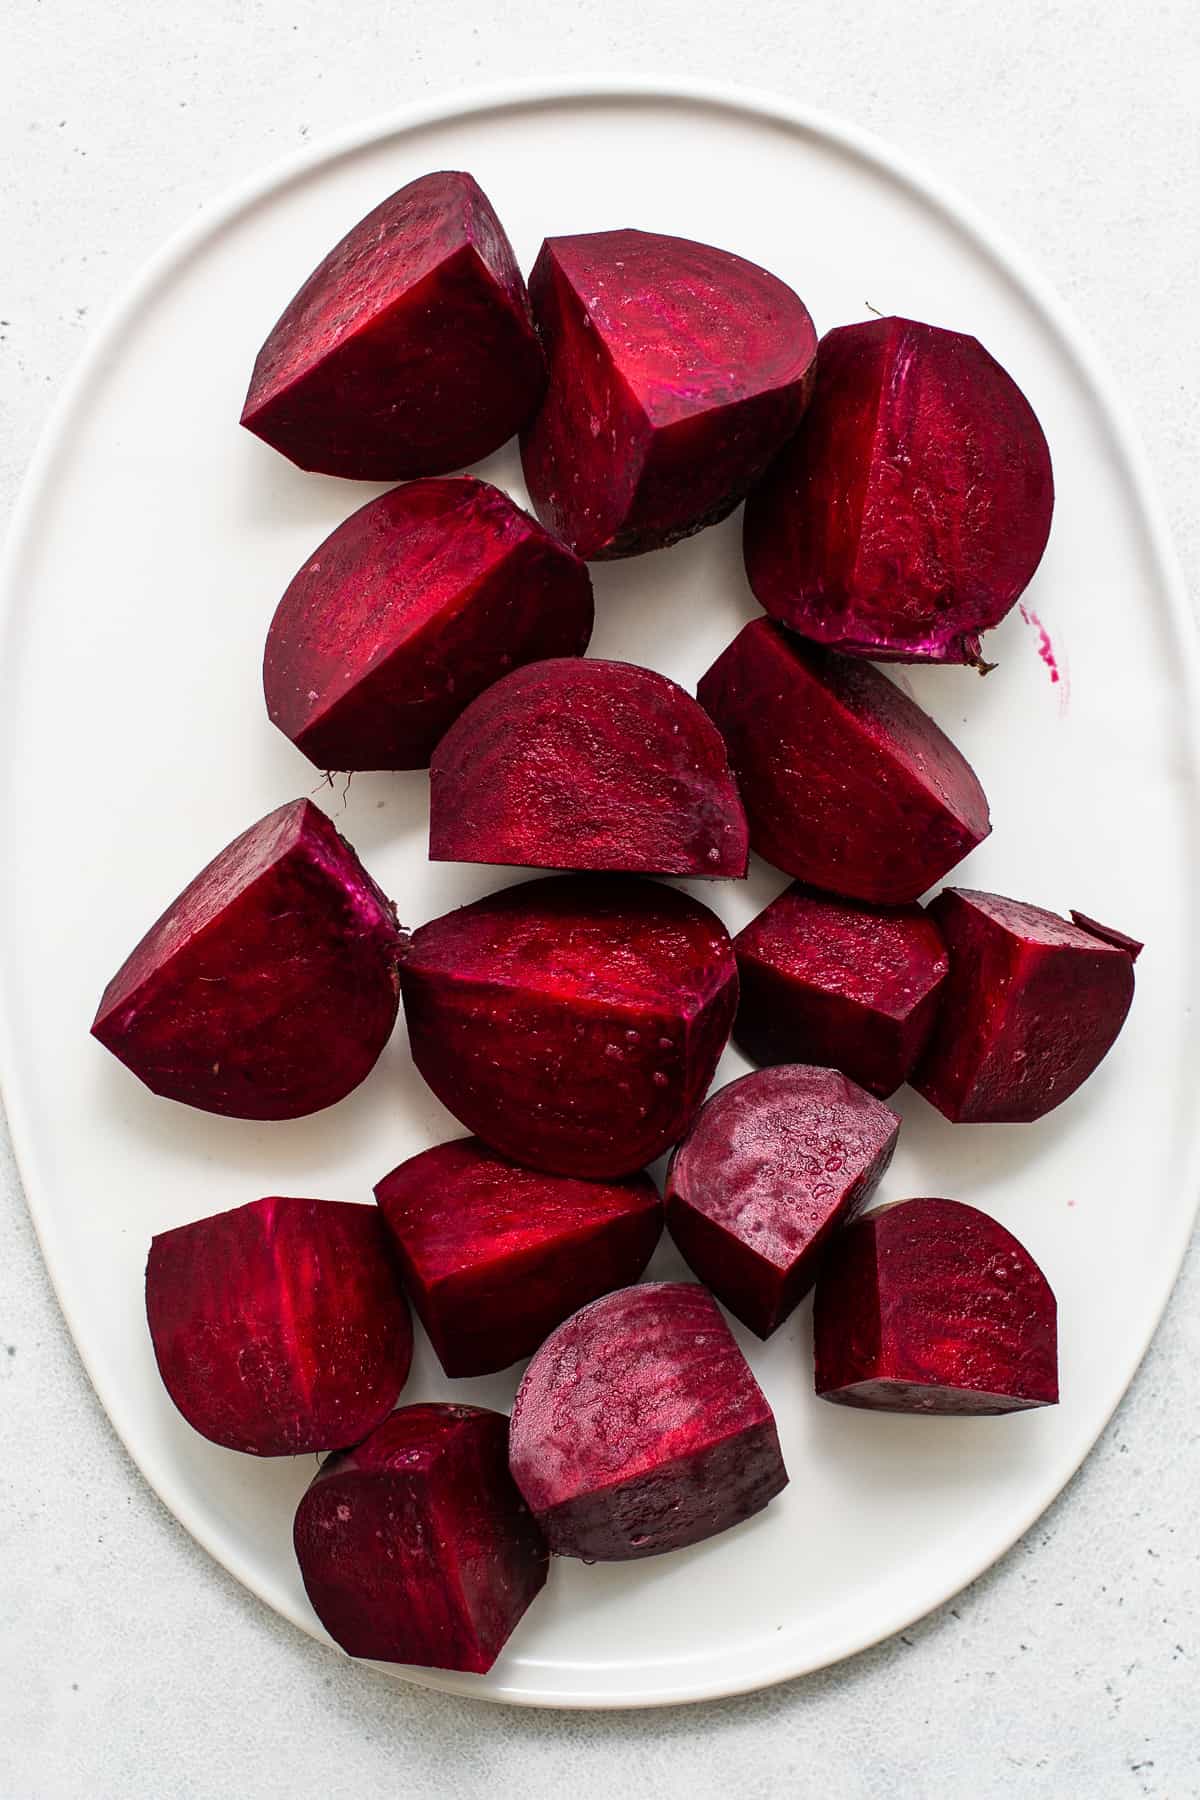 Sliced beets on a plate.